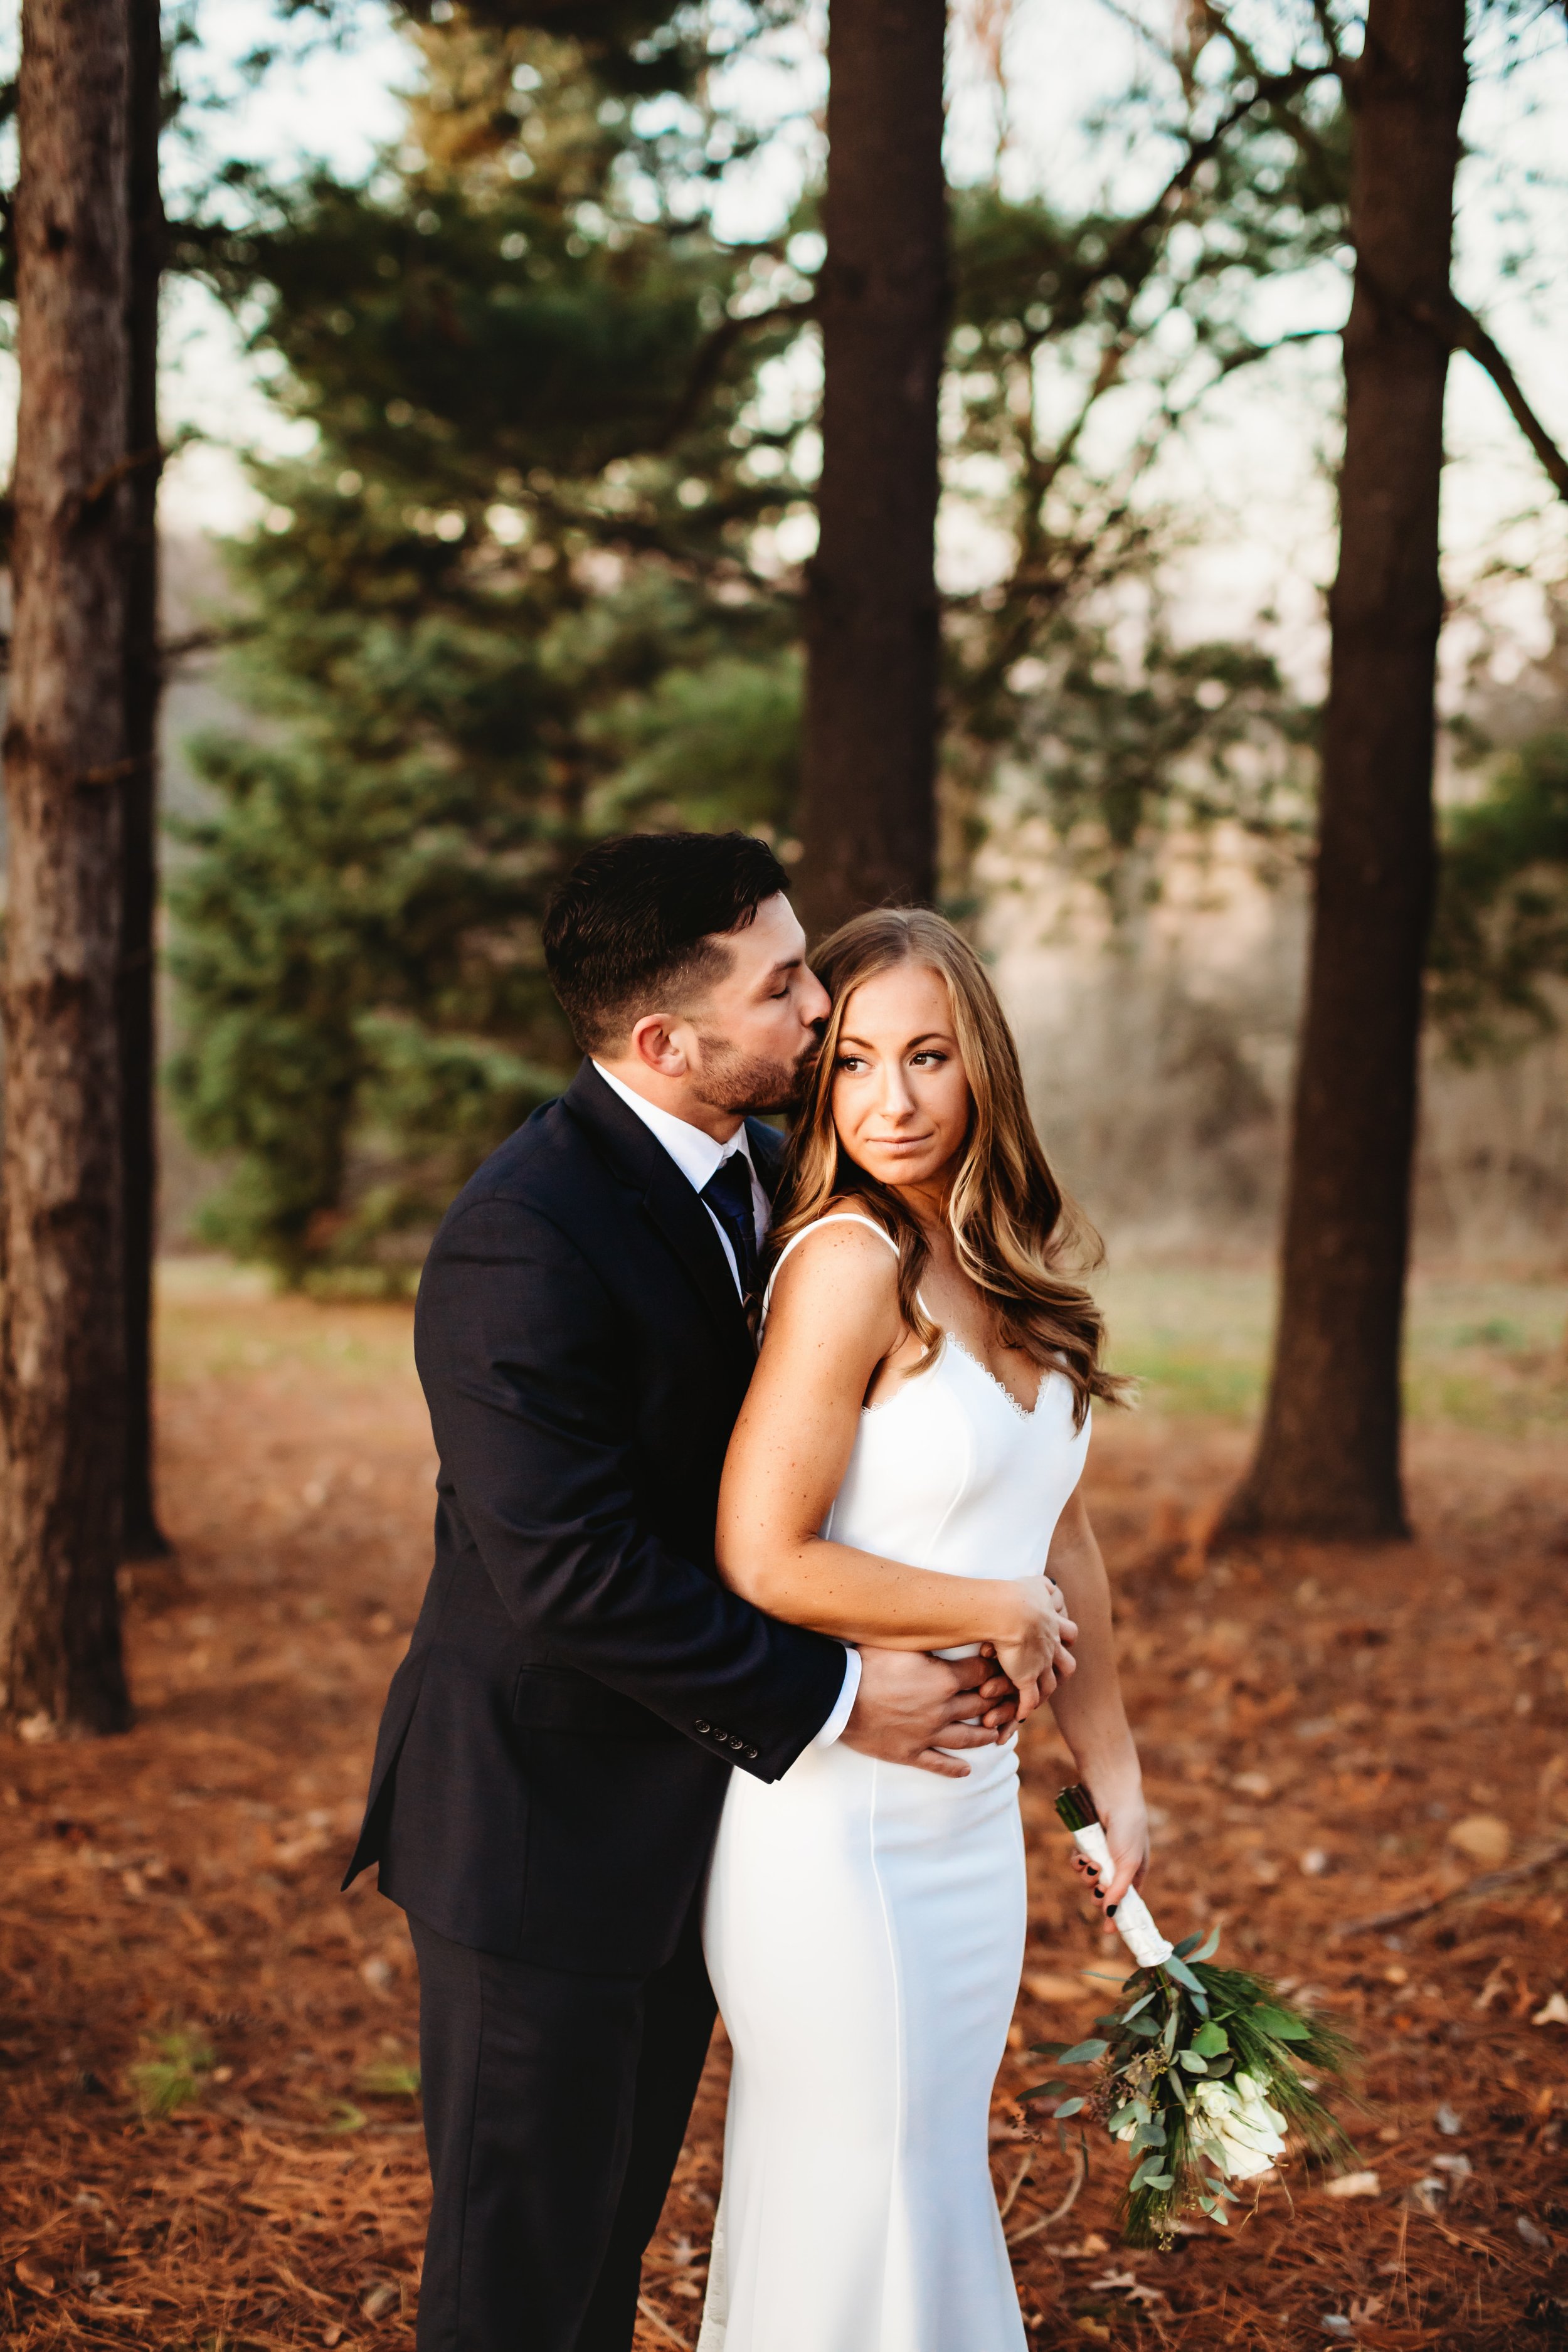  Teala Ward Photography captures a new husband and wife on their wedding day snuggling close. black suit winter wedding misty bridal portraits #tealawardphotography #tealawardweddings #LaSalleIllinois #IronwoodontheVermillion #weddingphotographyIL 